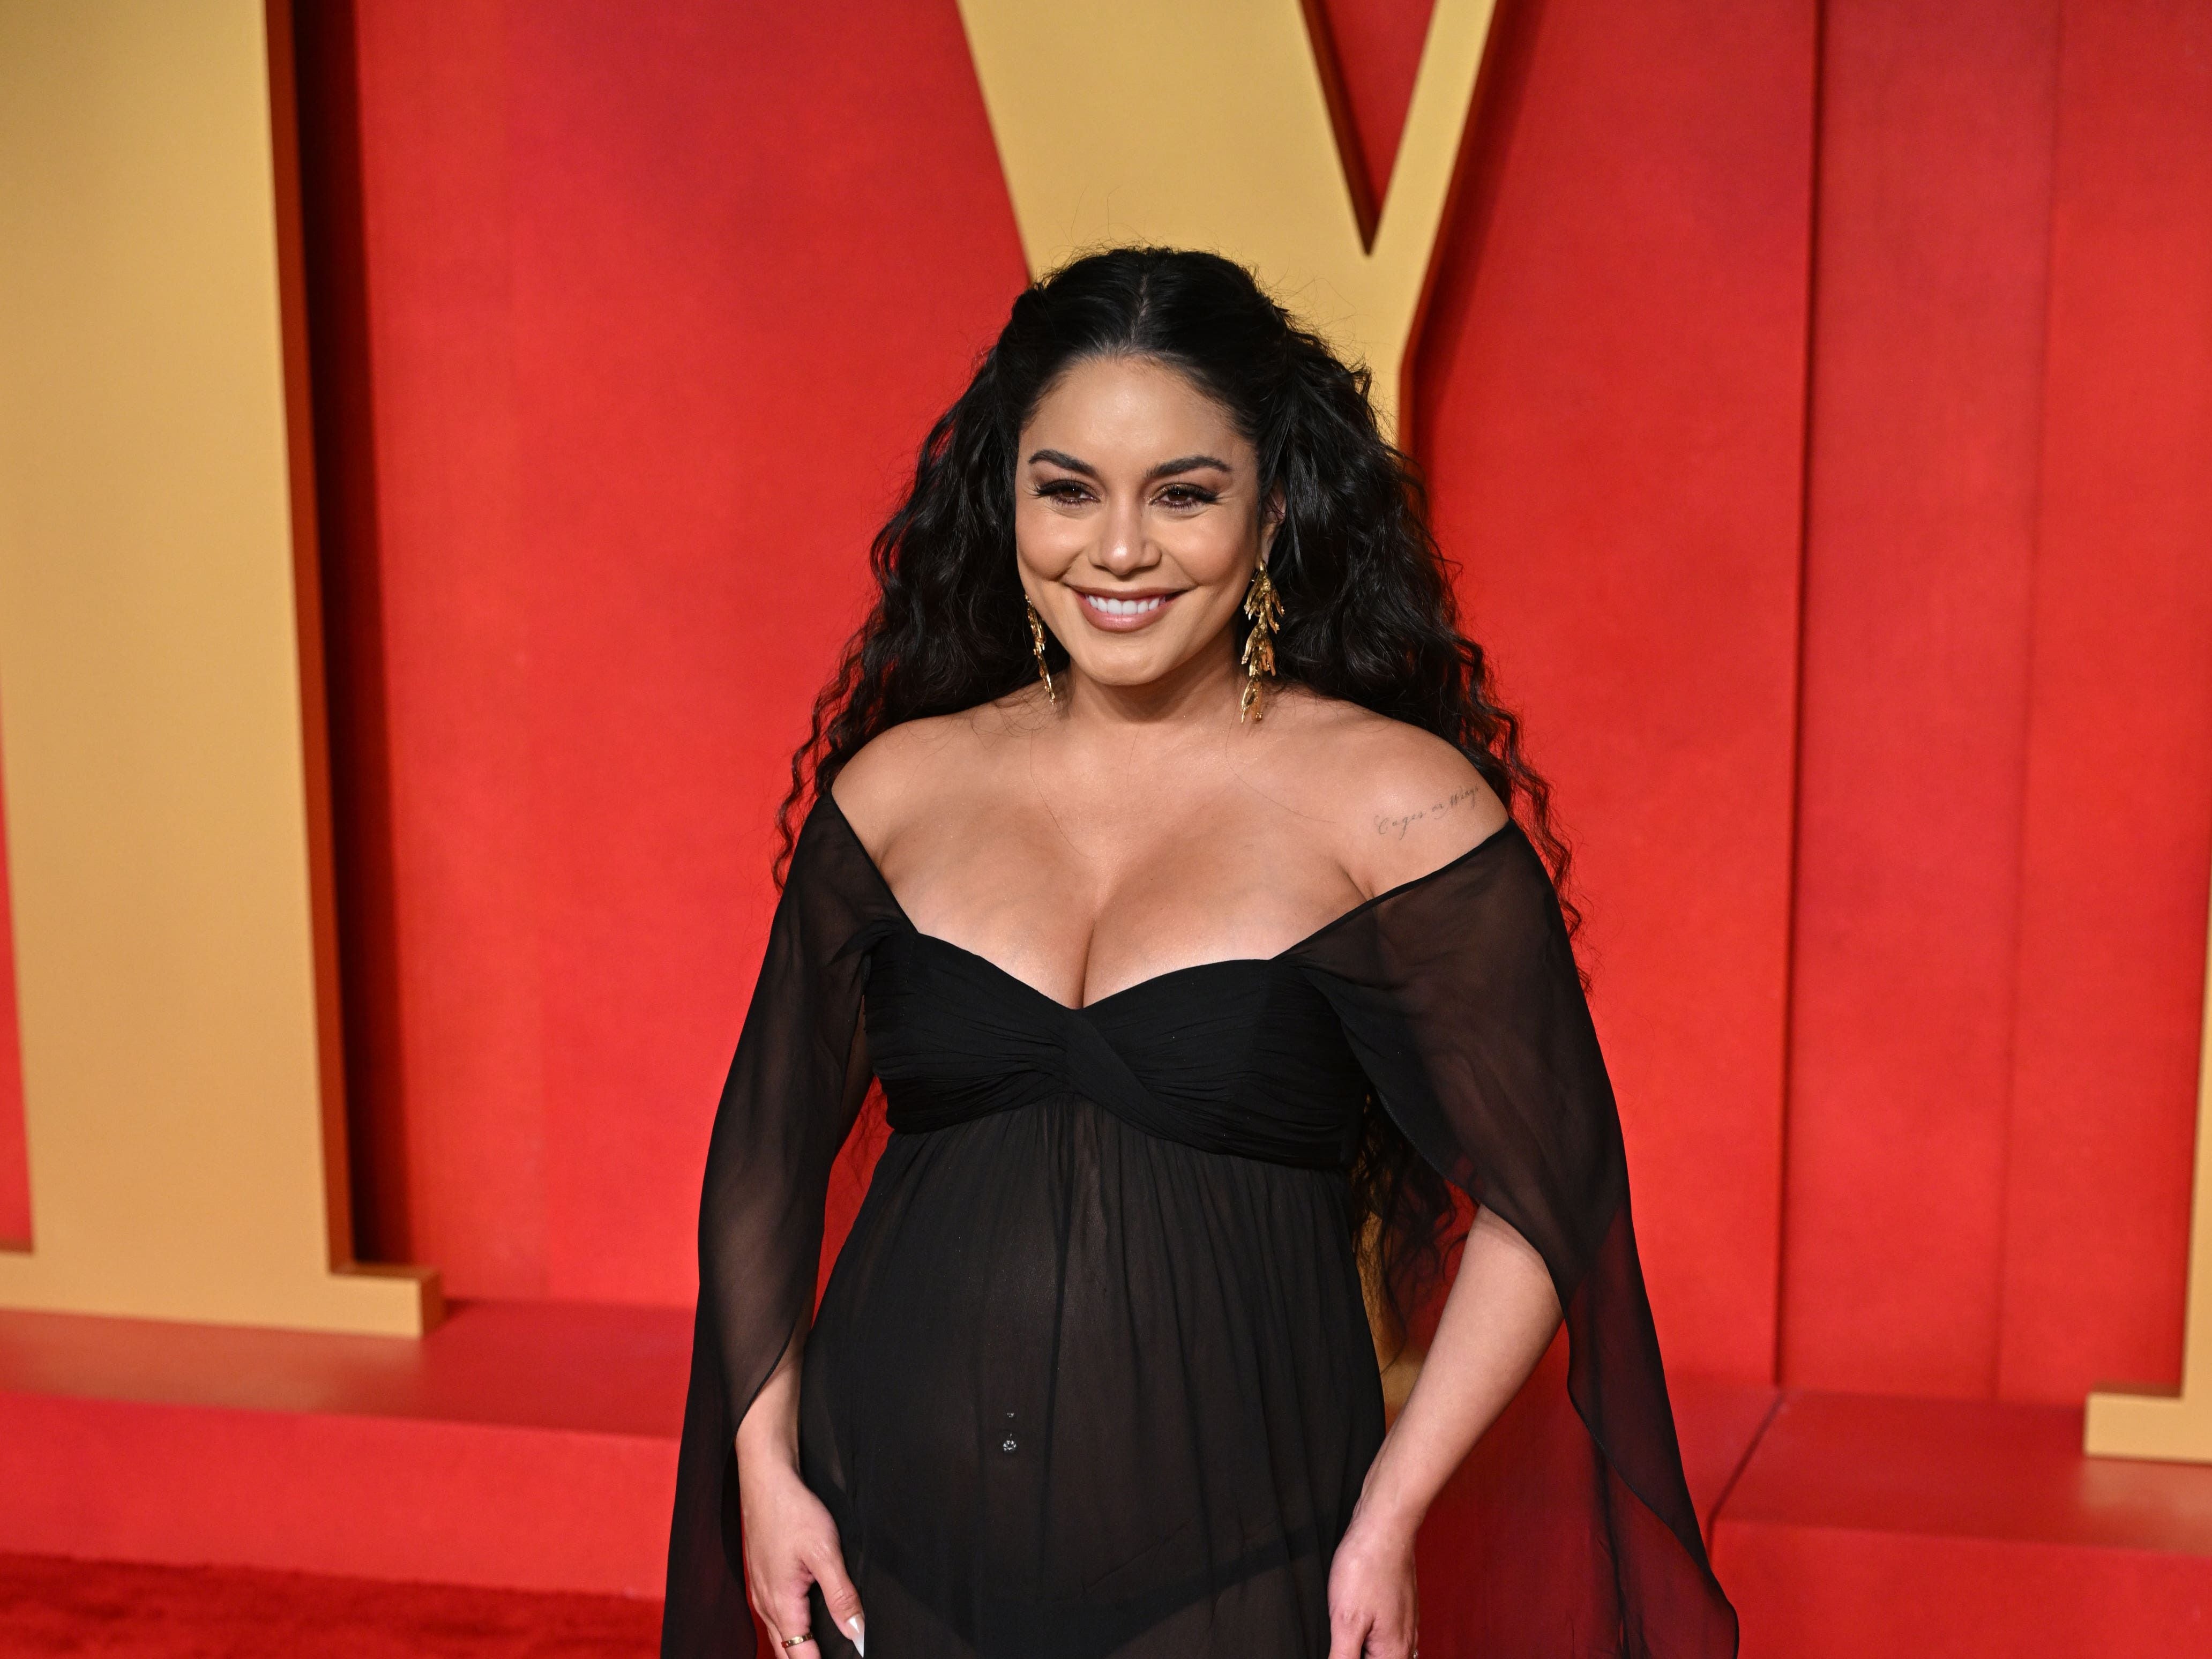 Vanessa Hudgens confirms arrival of first baby: ‘Mum, dad and baby are healthy’